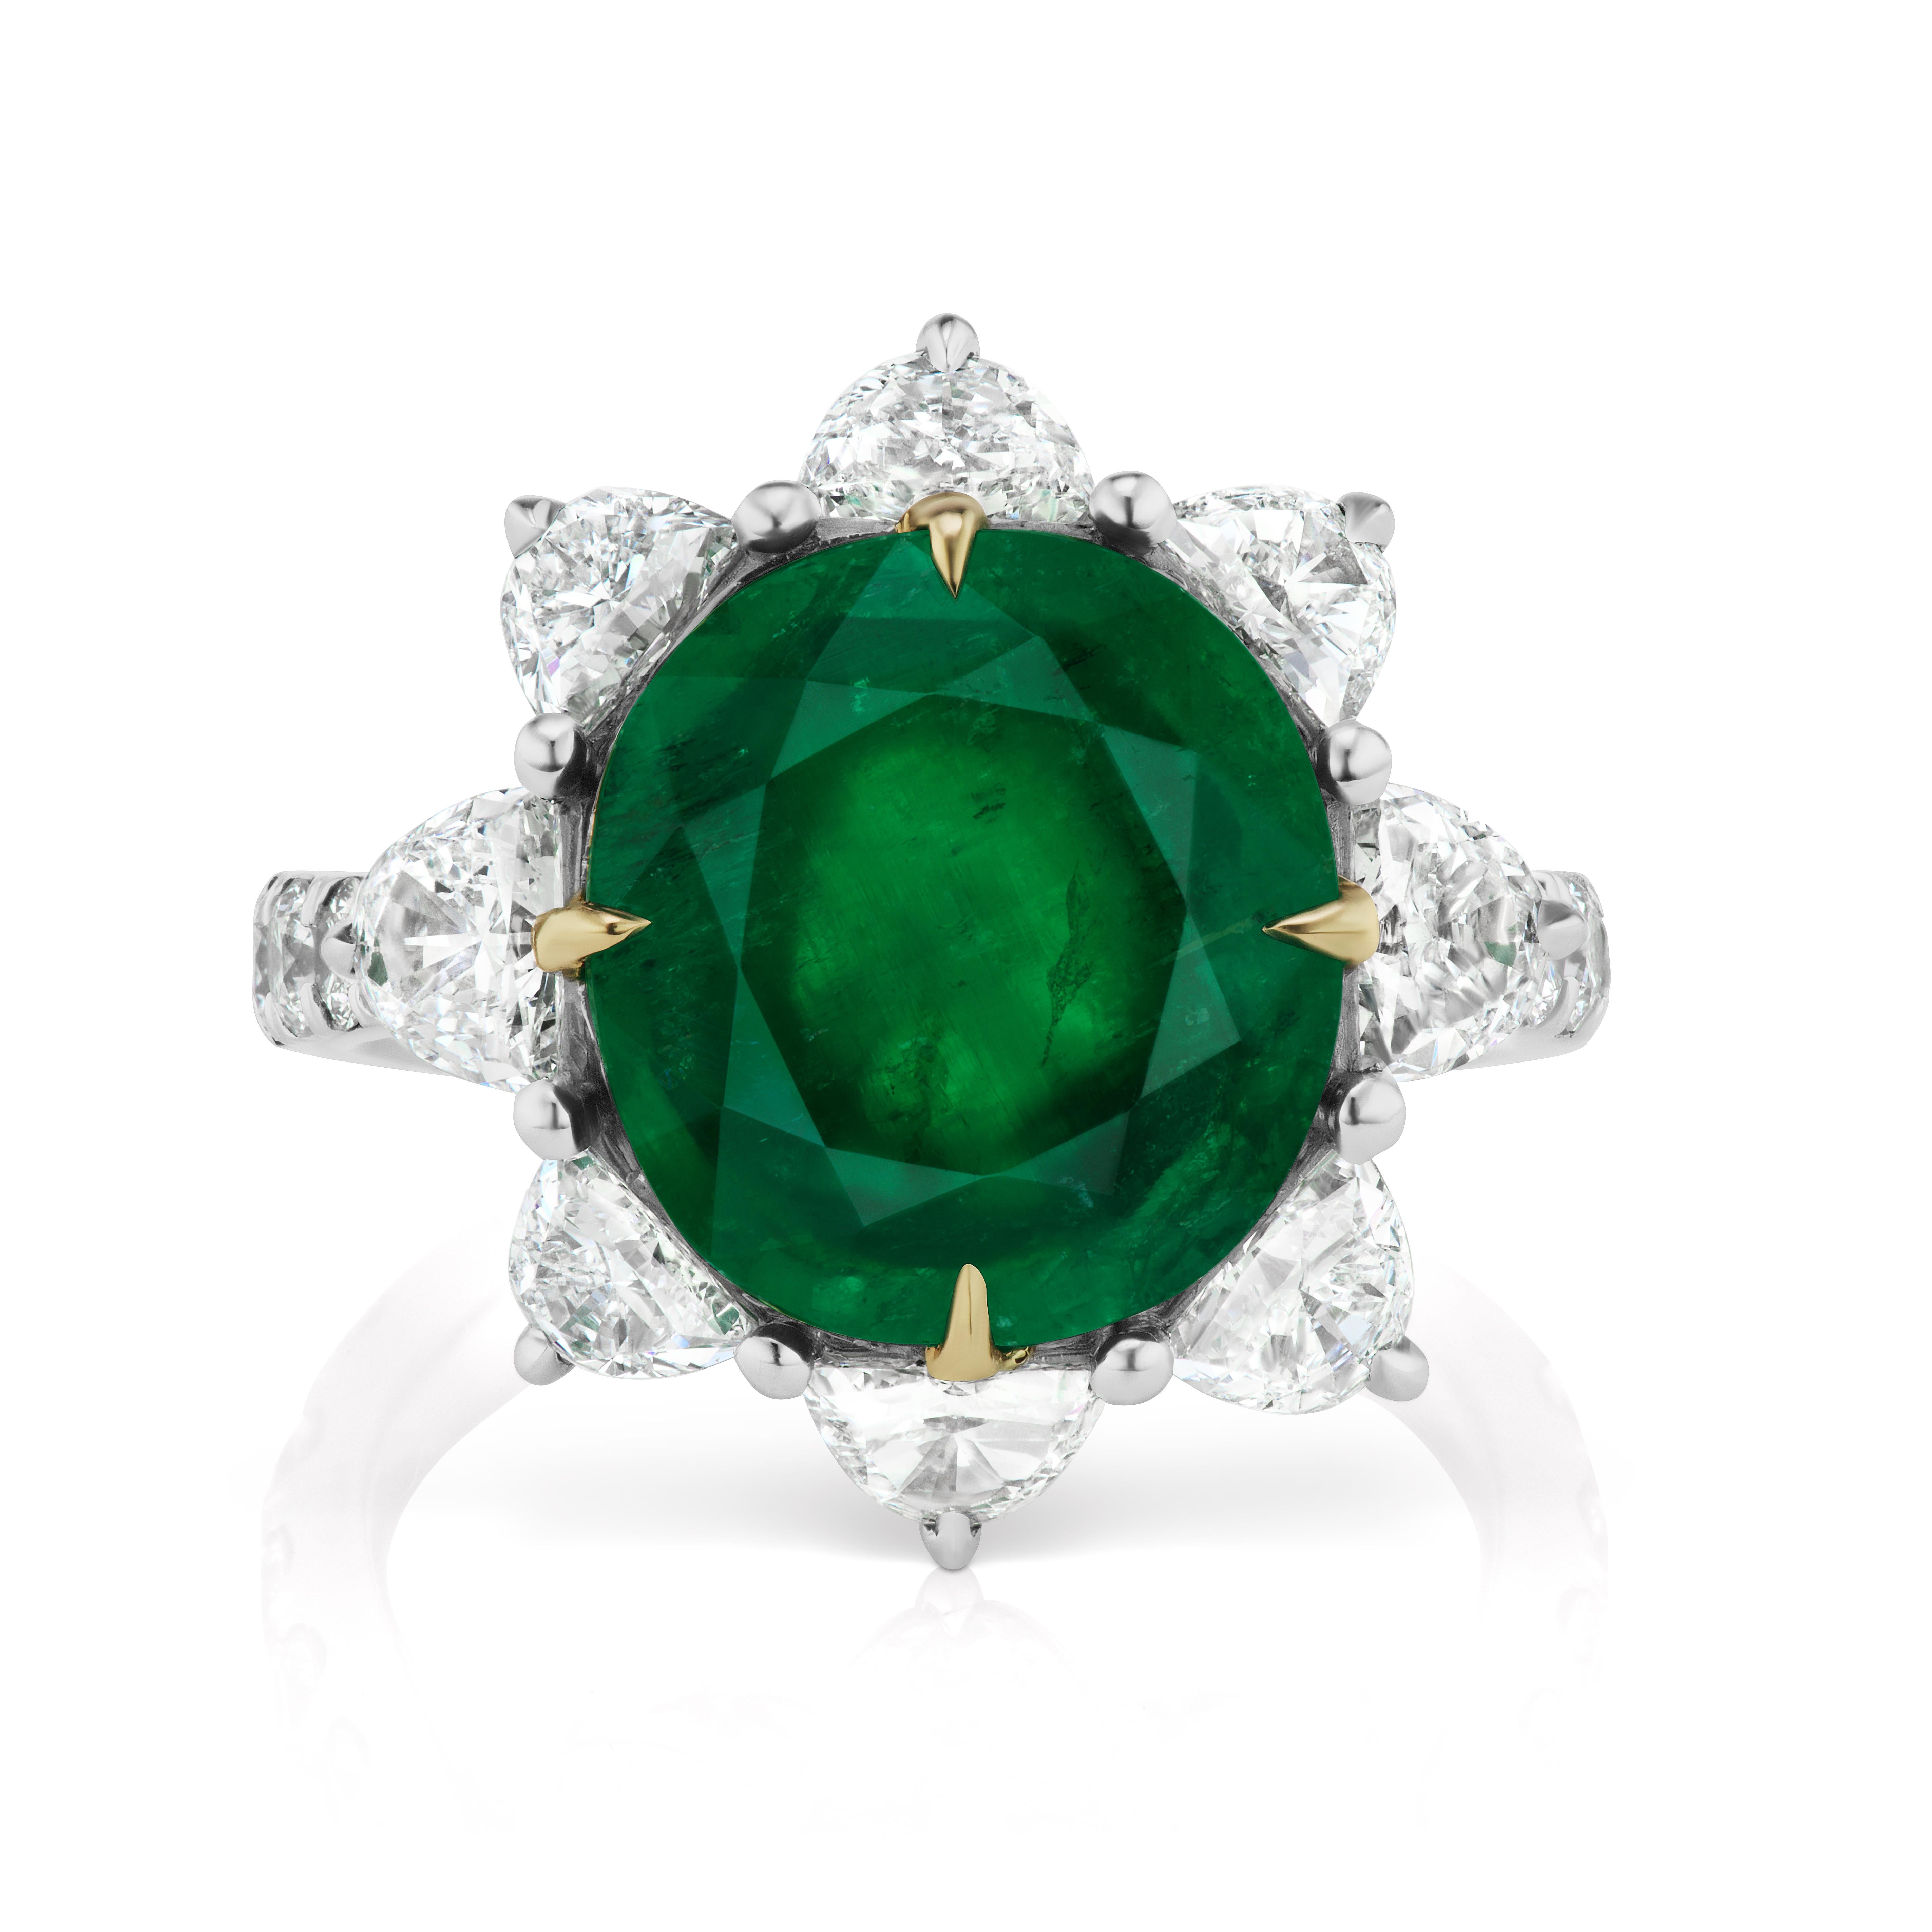 Centering upon a 4.57 Carat Cushion Cut Emerald surrounded by 8 Half Moon Diamonds weighing 1.57 Carats and 14 Round Brilliant Diamonds on the shank weighing 0.60 Carats. 
Set in Platinum and 18 Karat Yellow Gold.
Size 6.